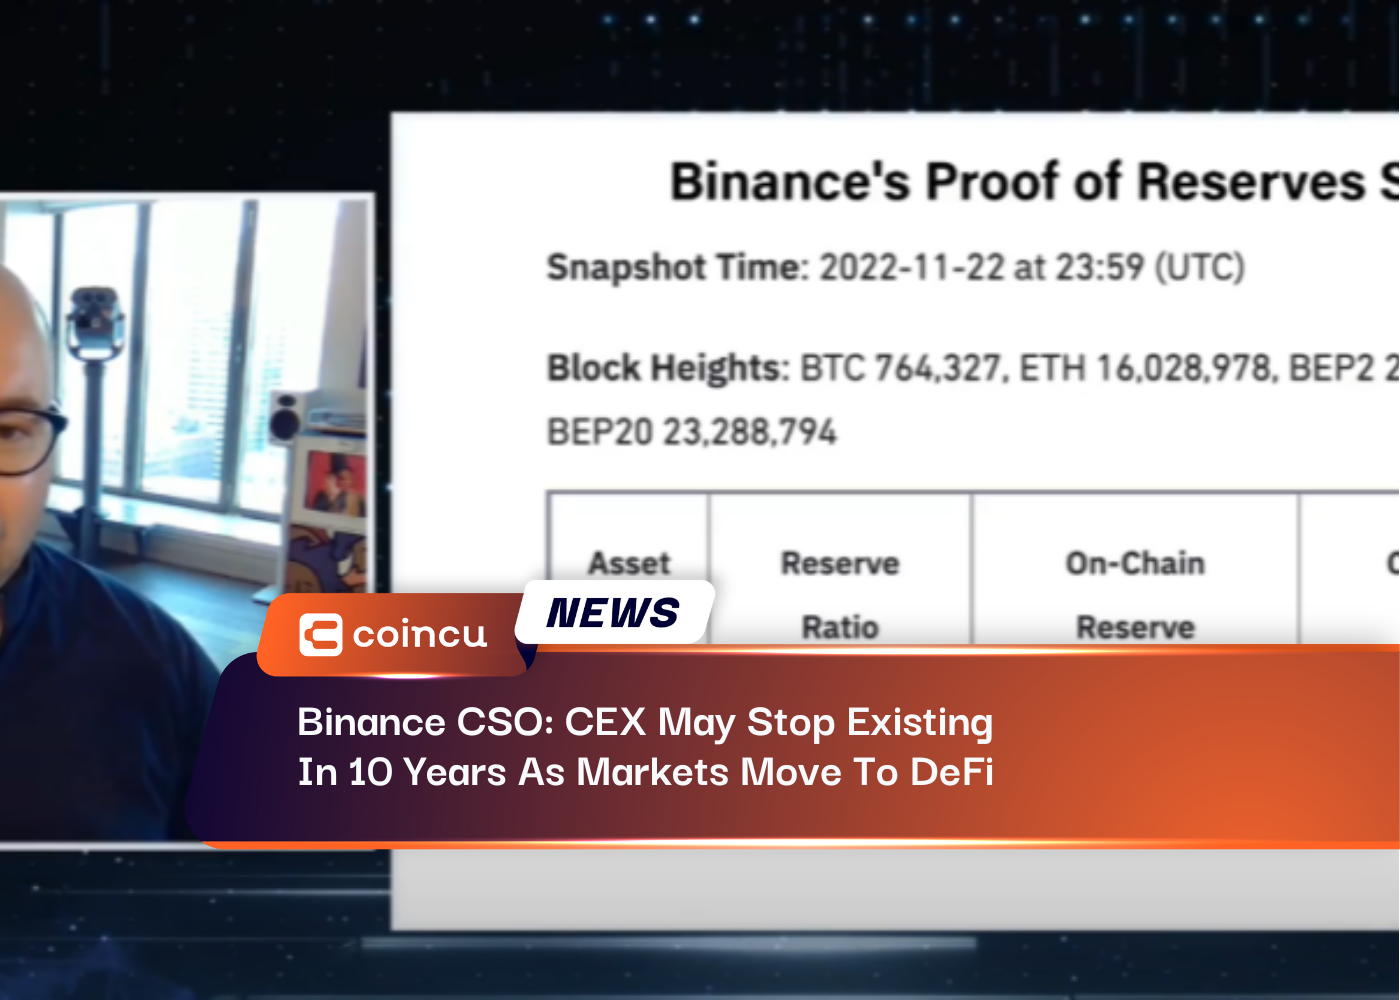 Binance CSO: CEX May Stop Existing In 10 Years As Markets Move To DeFi